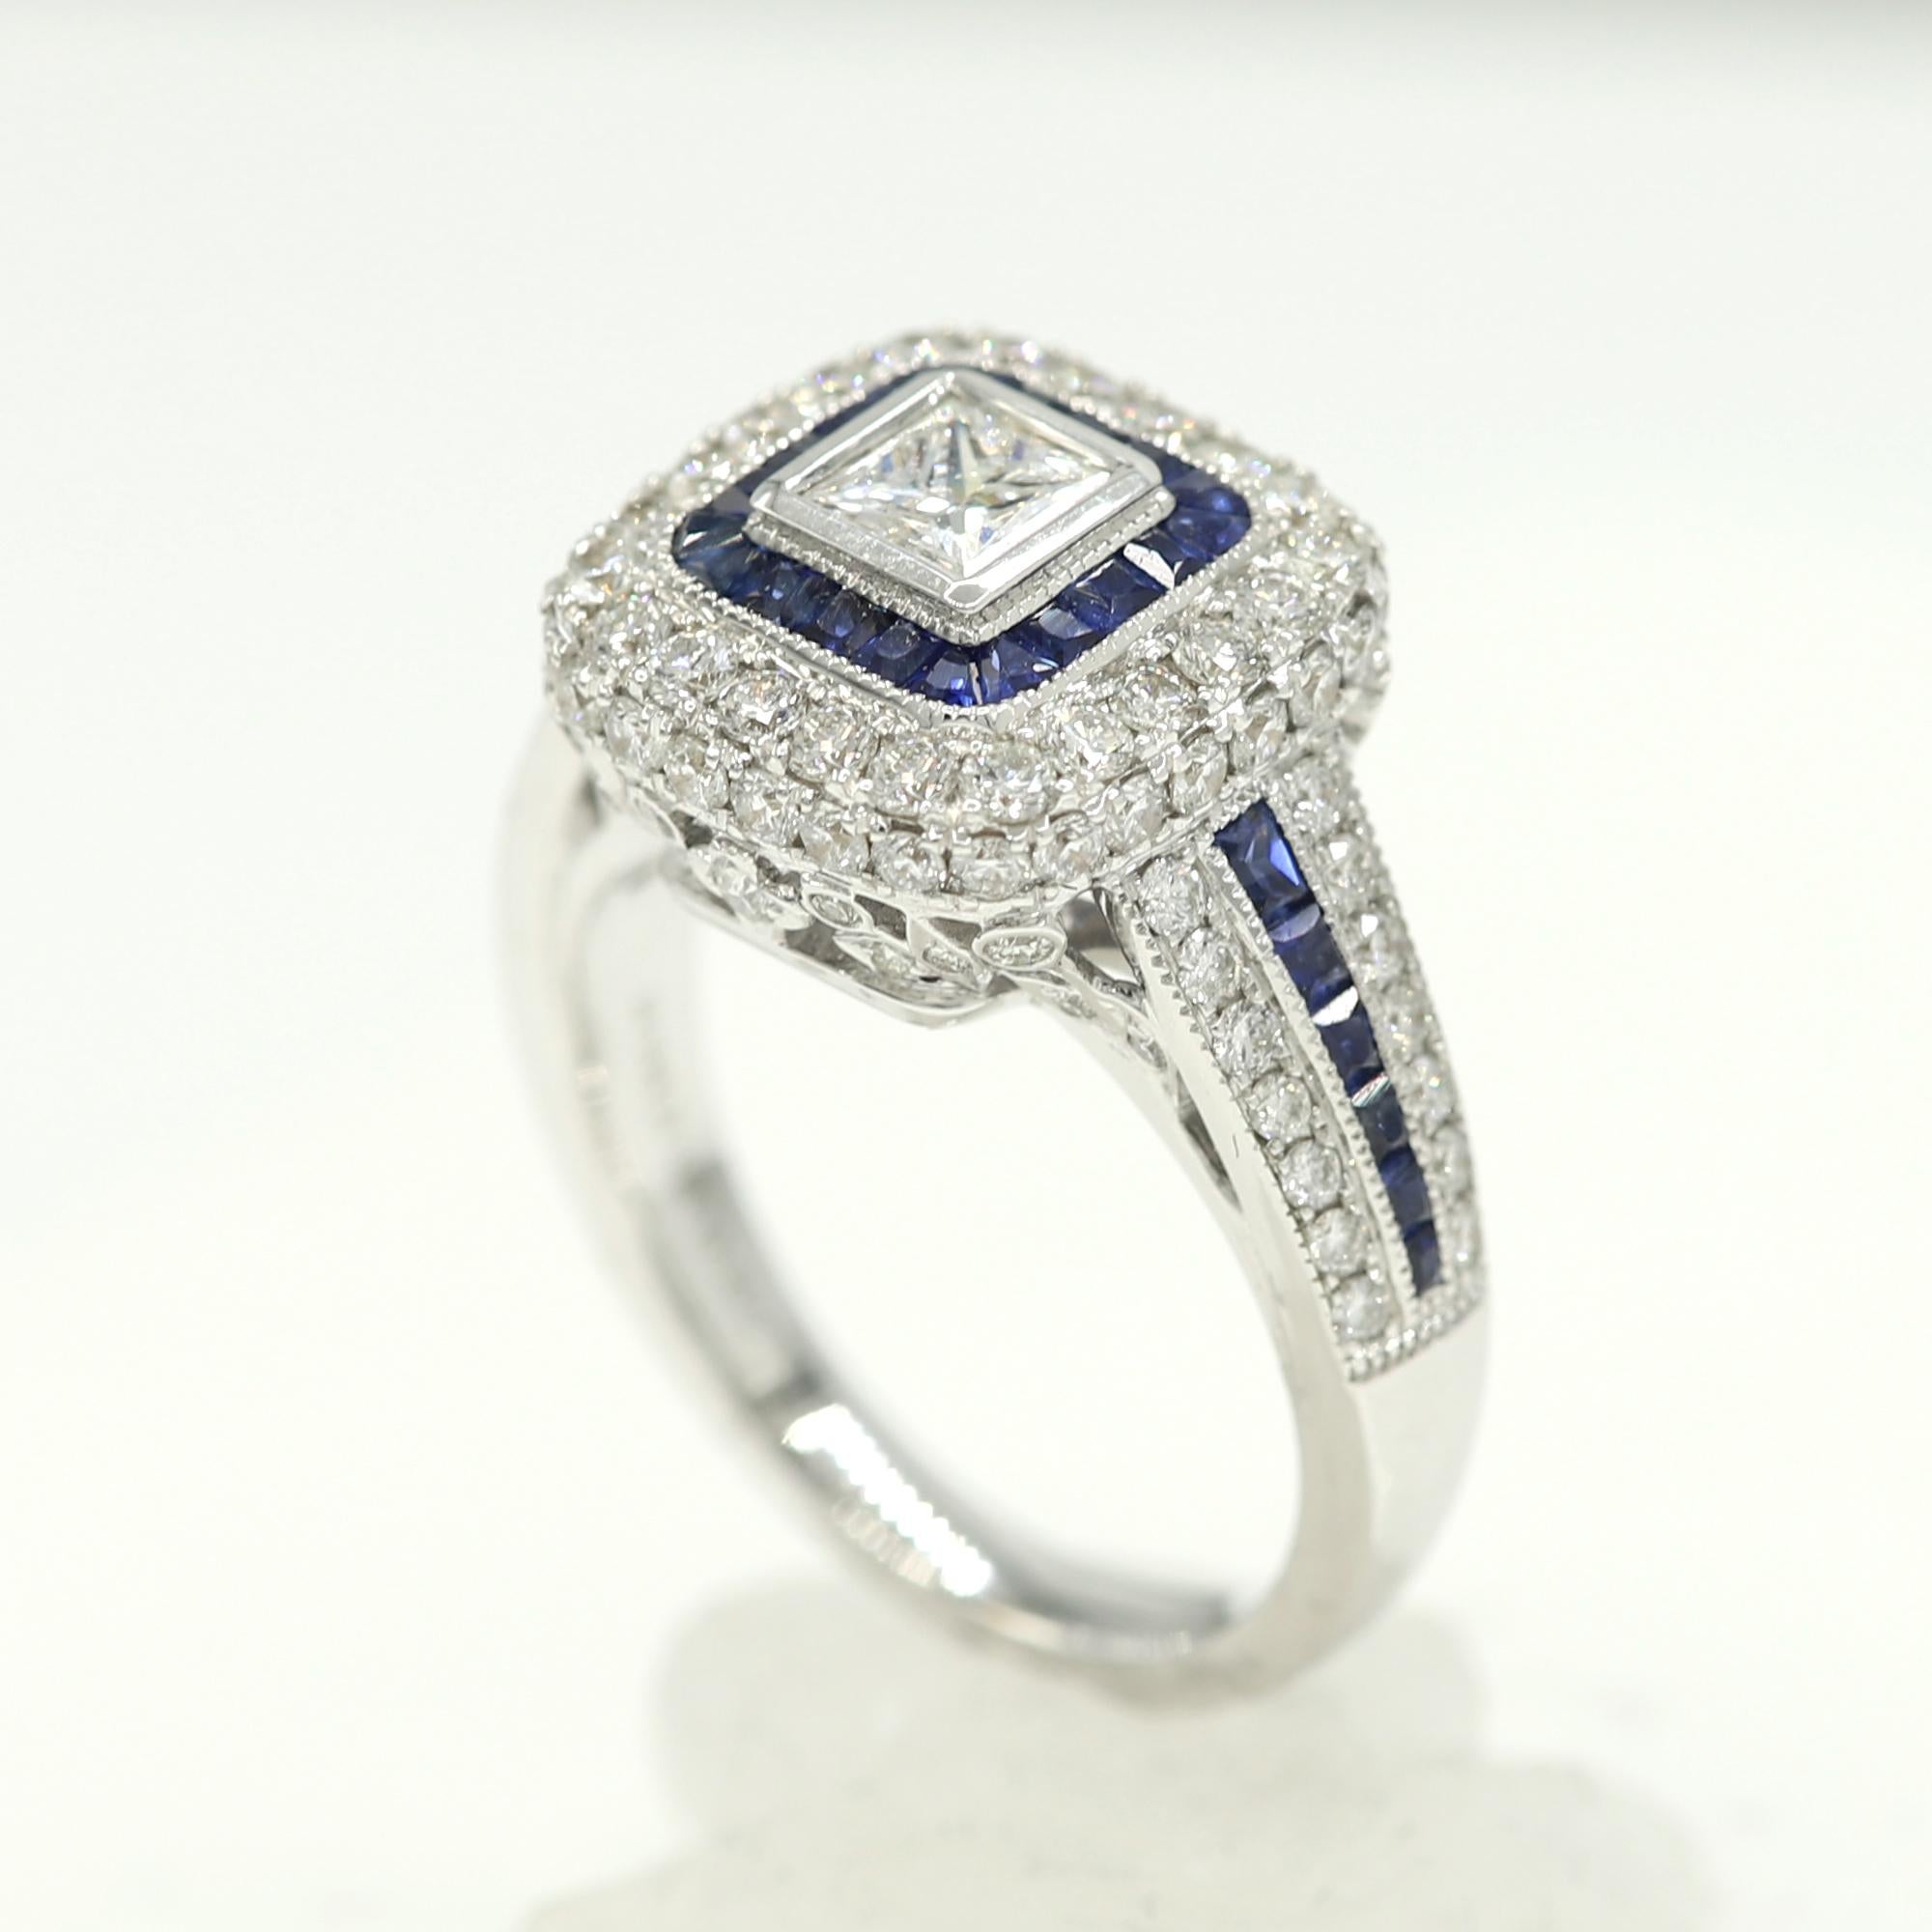 Brilliant Art Deco Style Ring. 18k White Gold 9.80 grams. Total all Diamonds 1.73 carat (center stones is princess cut Diamond 0.41 carat) Blue sapphire total 0.80 carat. overall design area size on the top is 13 x 13 mm. Finger size 7.
diamond are